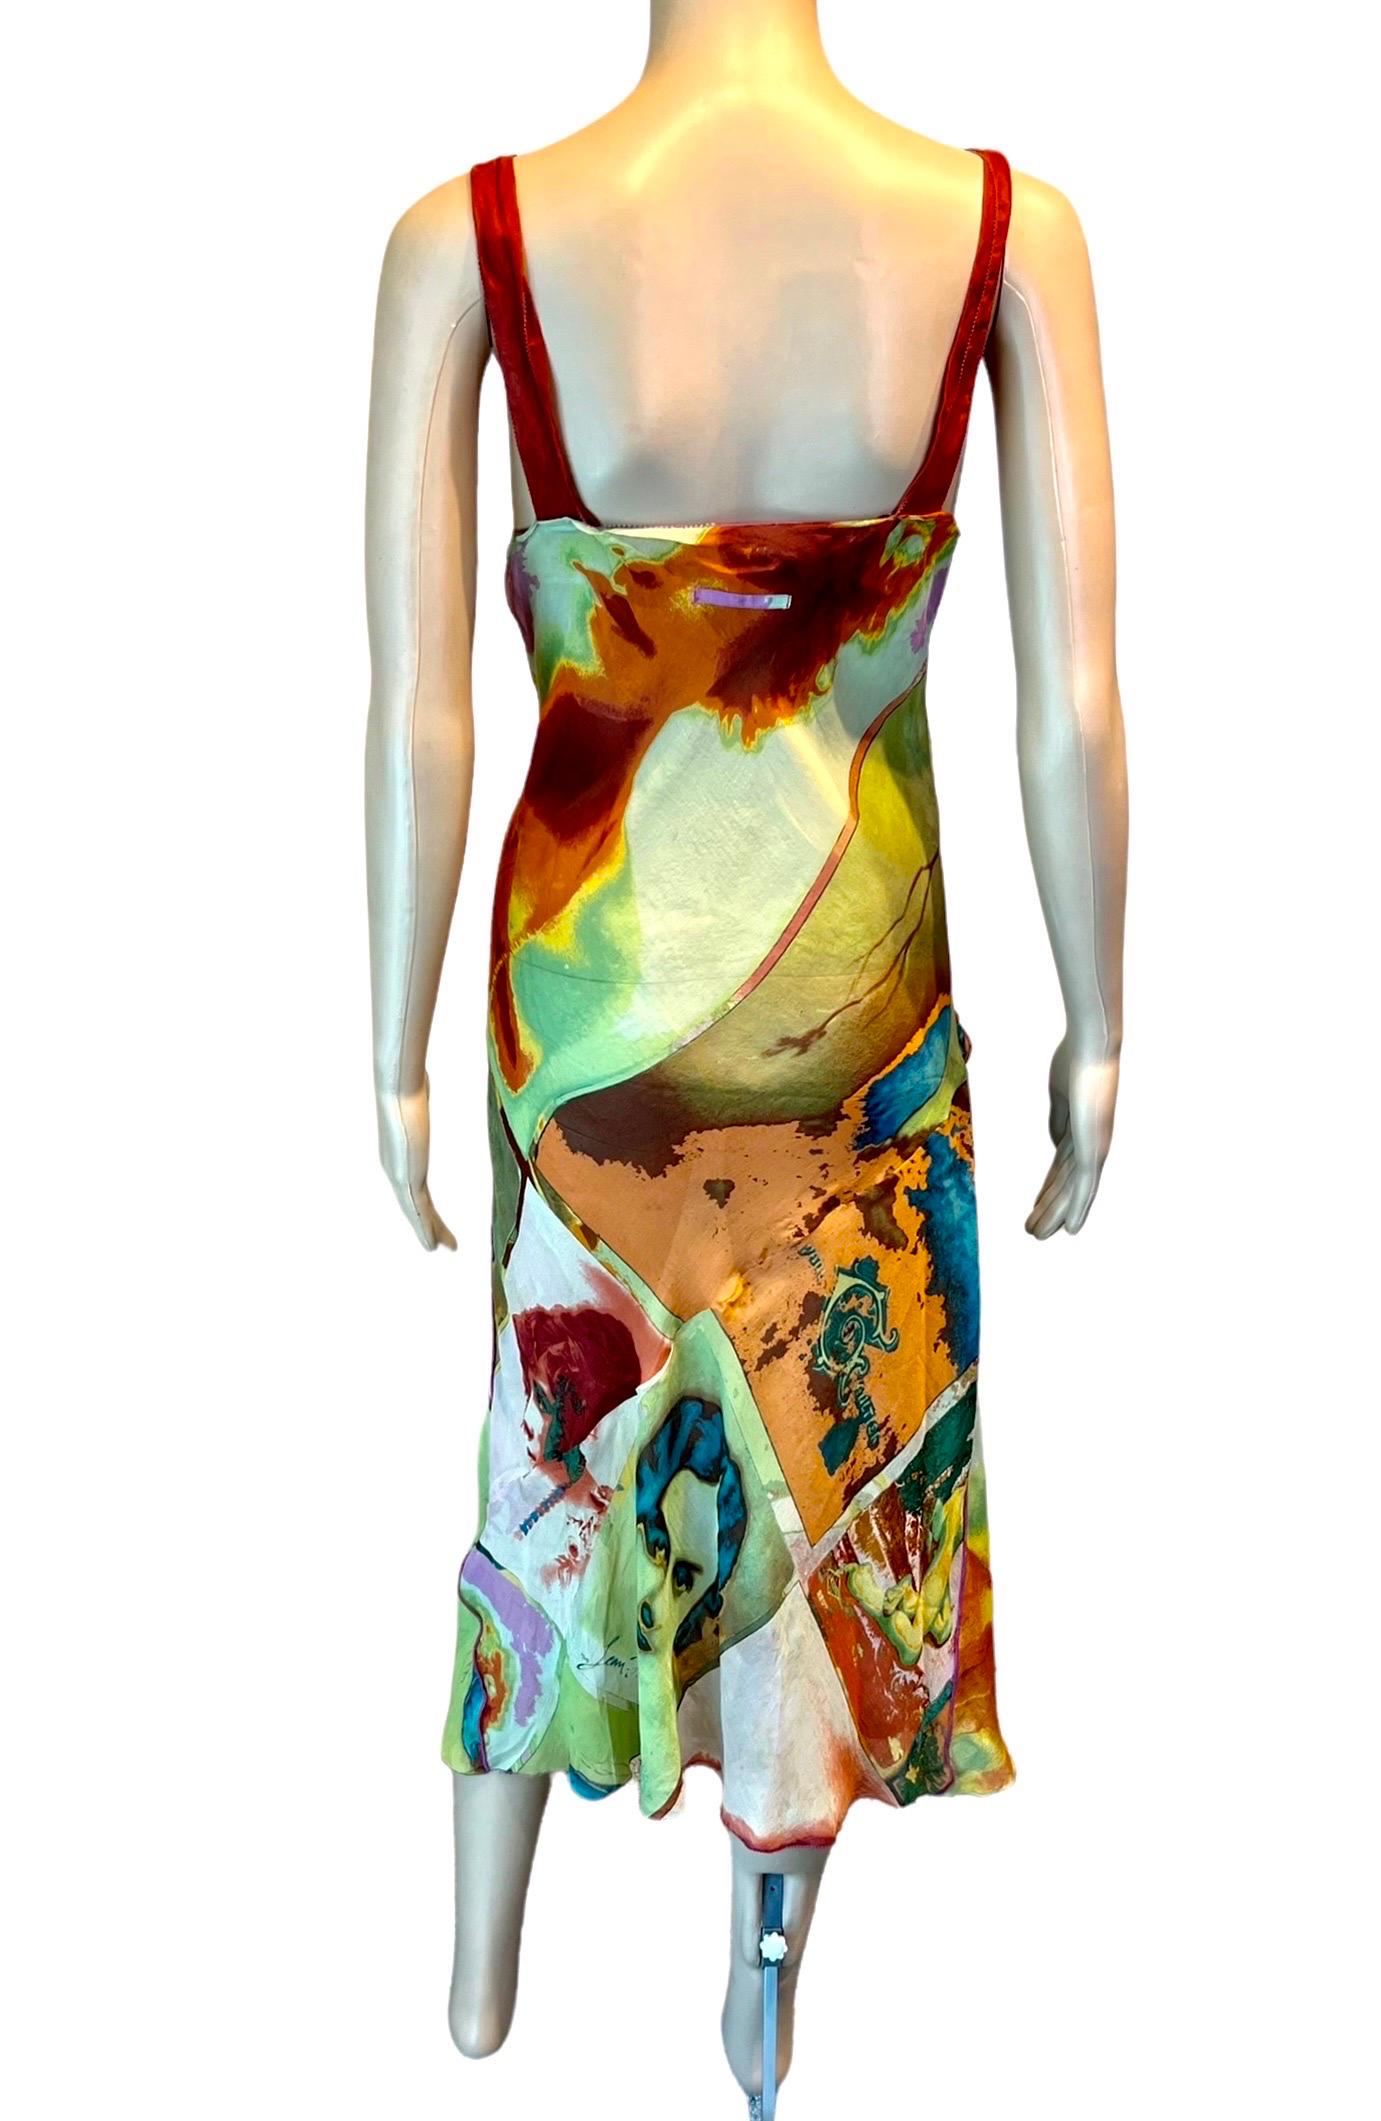 Jean Paul Gaultier S/S 2002 Vintage “Portraits” Faces People Print Slip Dress  In Good Condition For Sale In Naples, FL